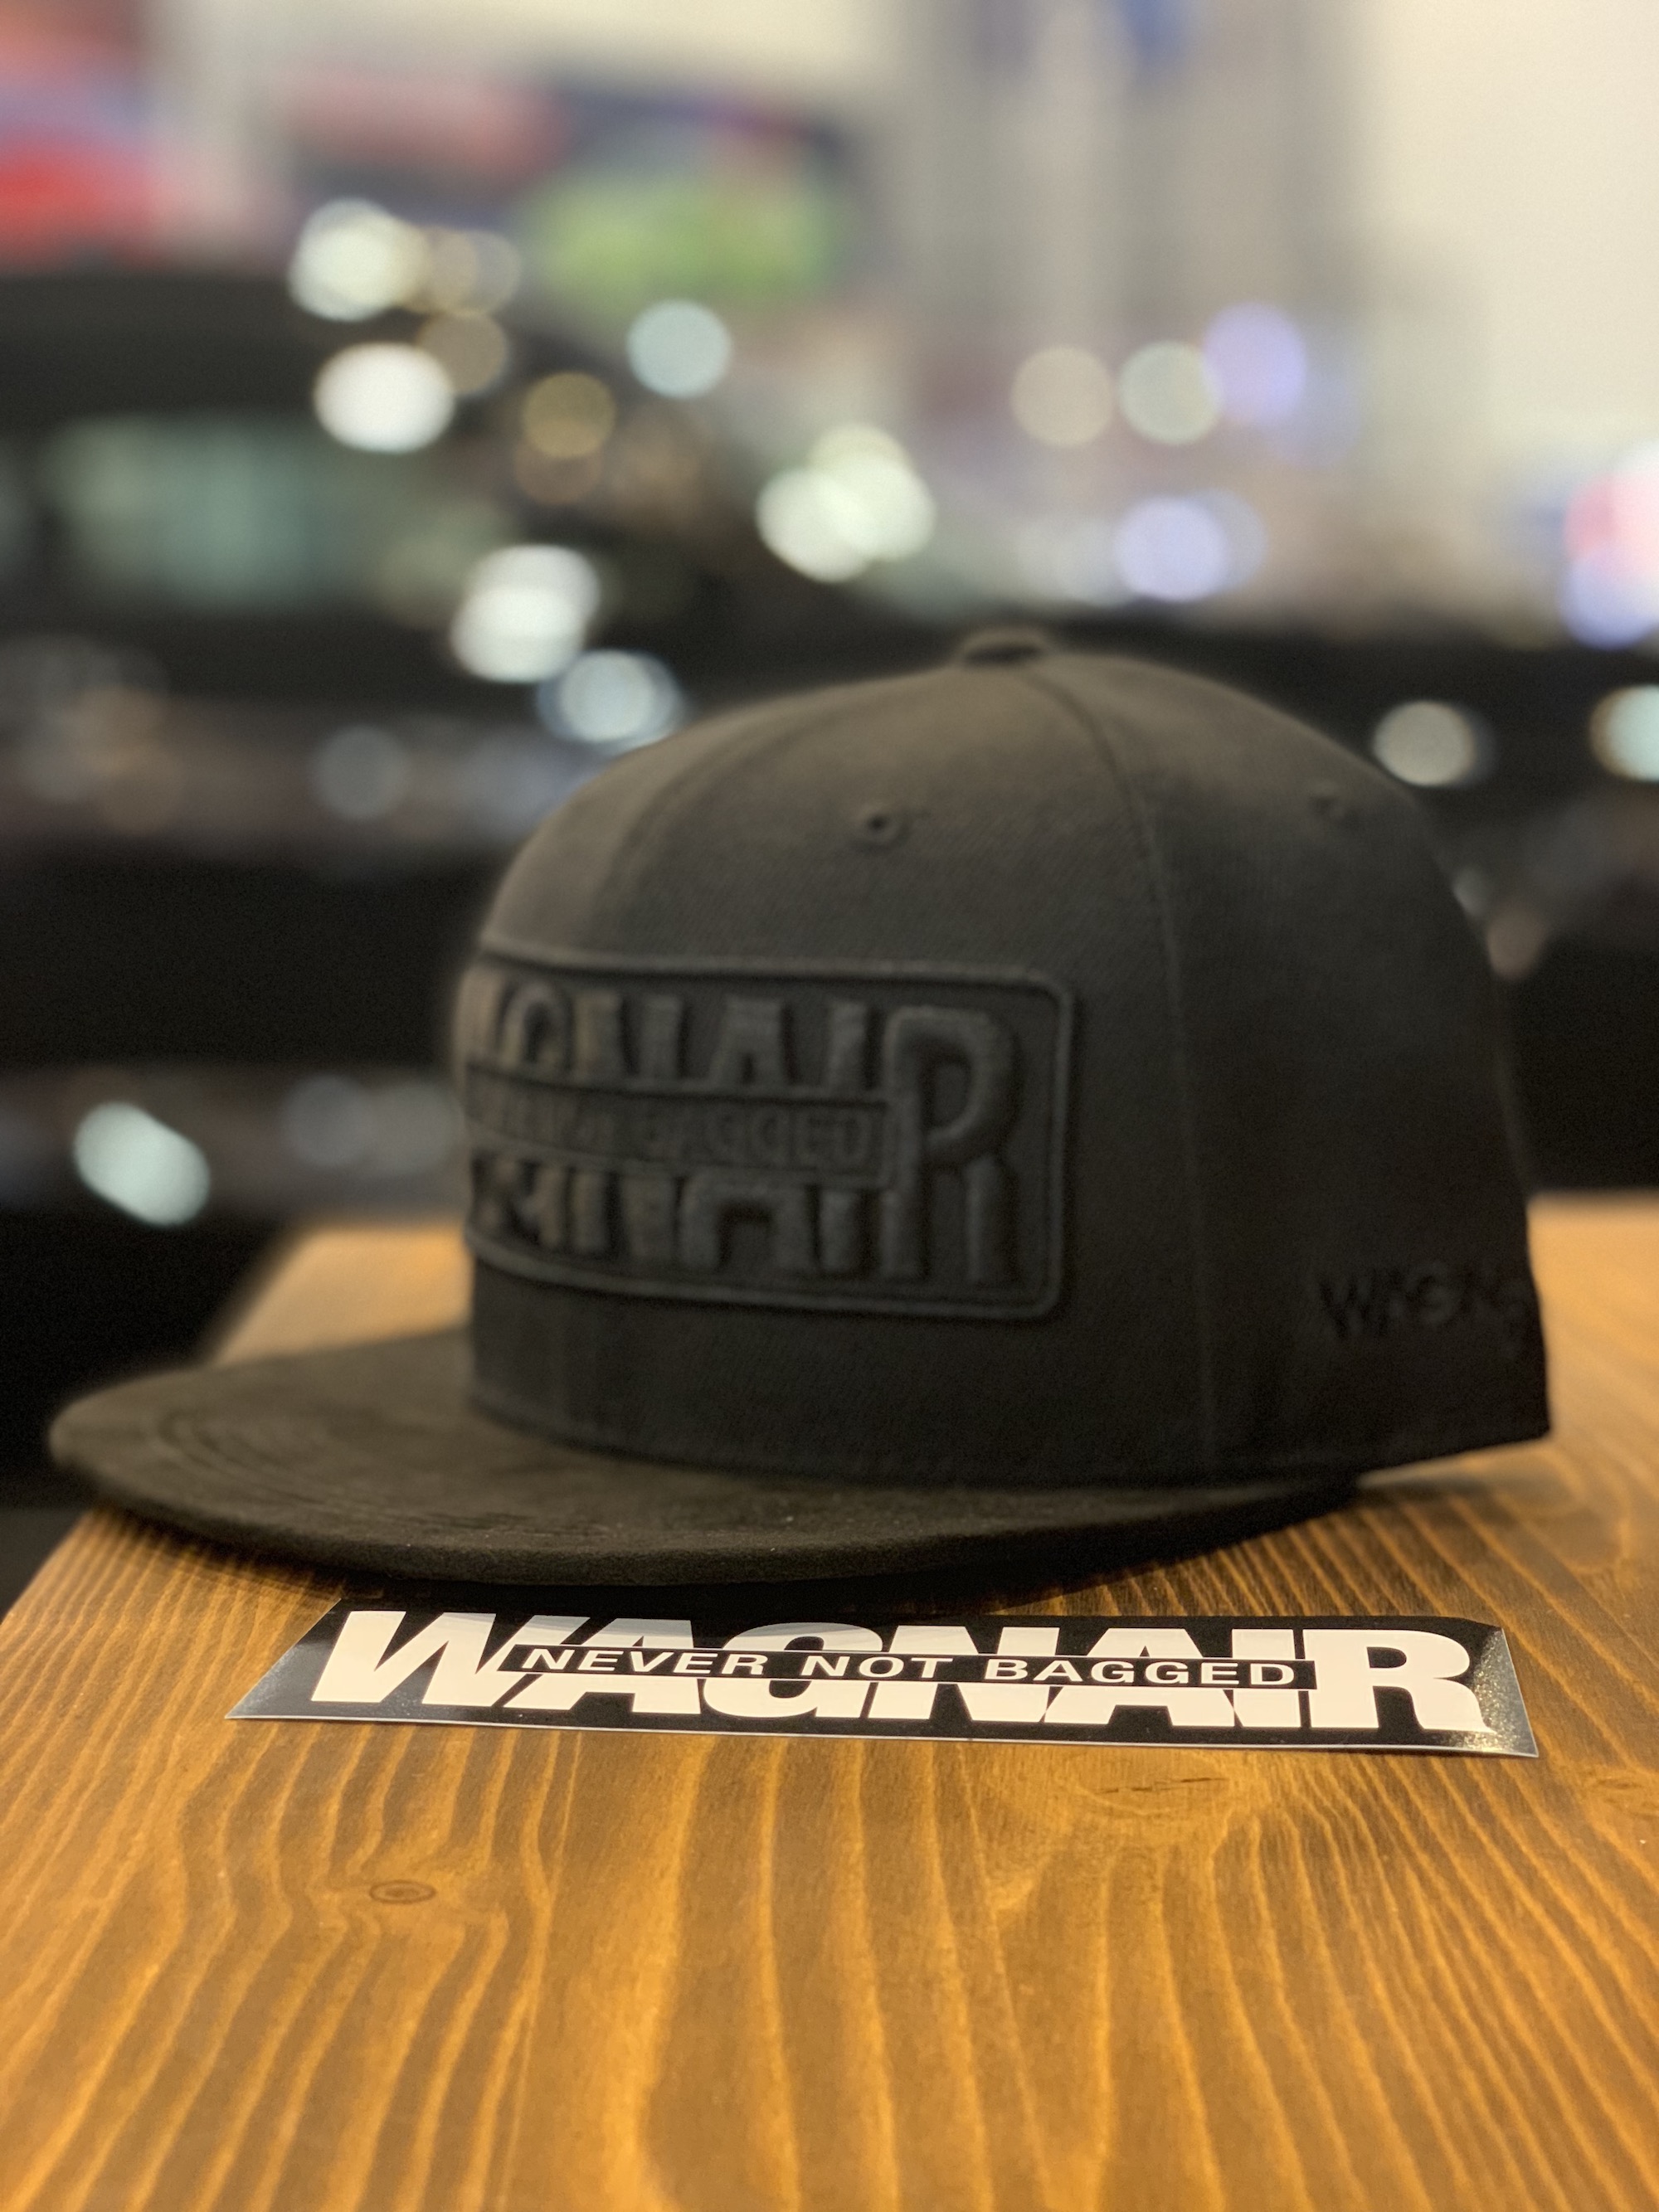 WagnAir "NEVER NOT BAGGED" Snapback